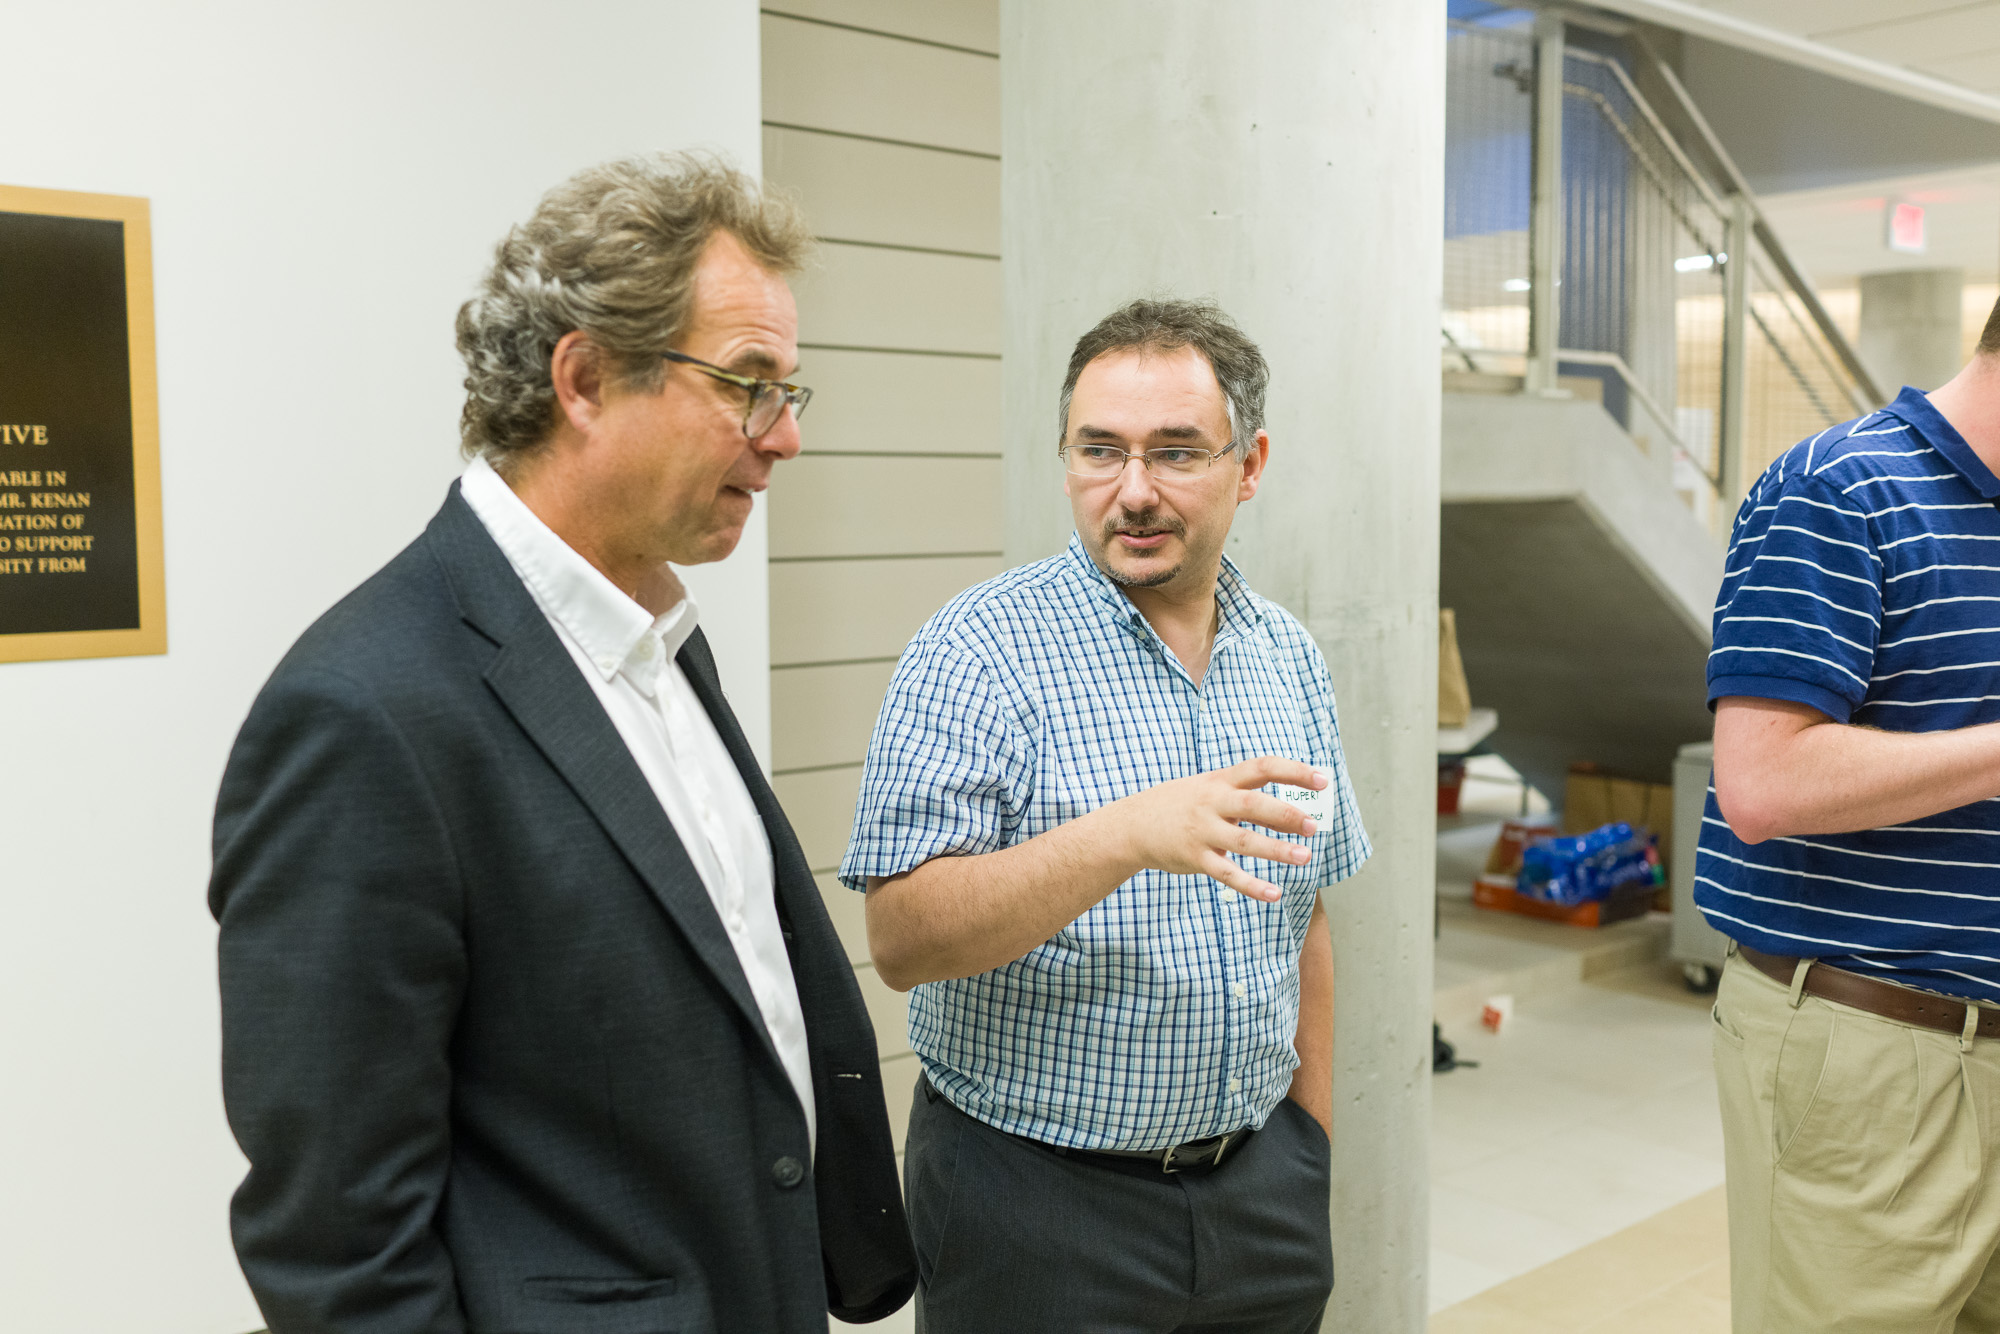 Two men in a modern building engage in a conversation; one wears glasses and a formal jacket, while the other holds a beverage and wears a striped shirt.